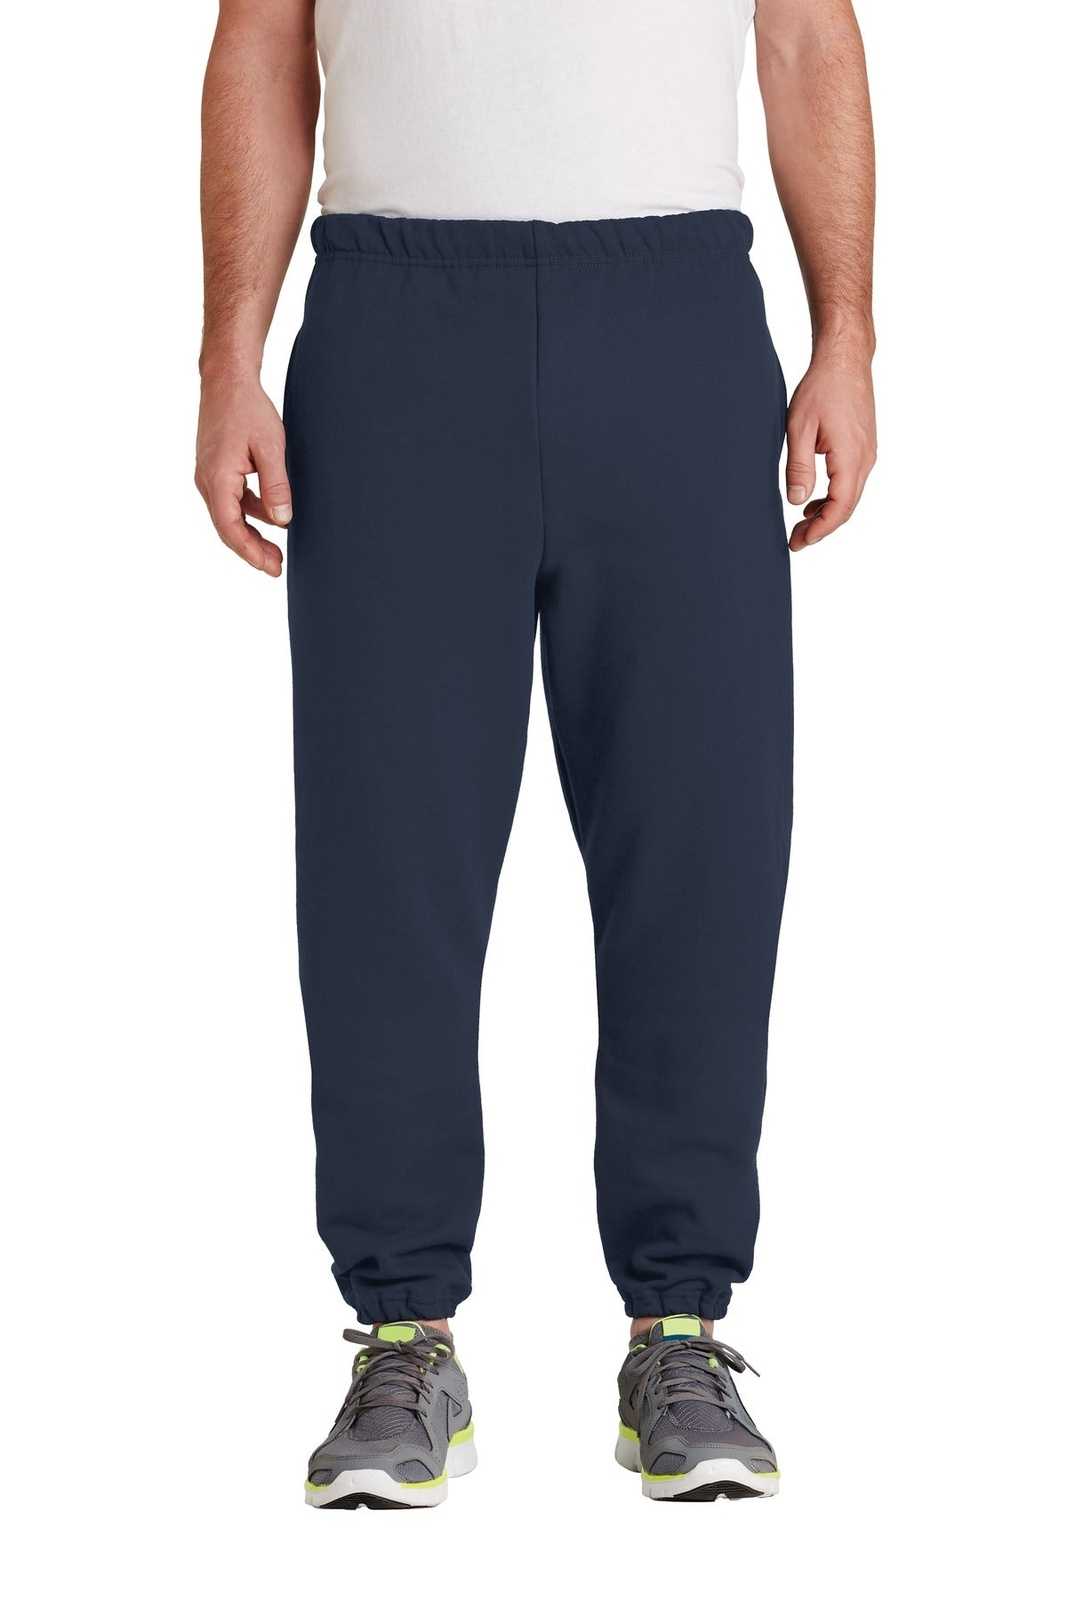 Jerzees 4850MP Super Sweats Nublend Sweatpant with Pockets - Navy - HIT a Double